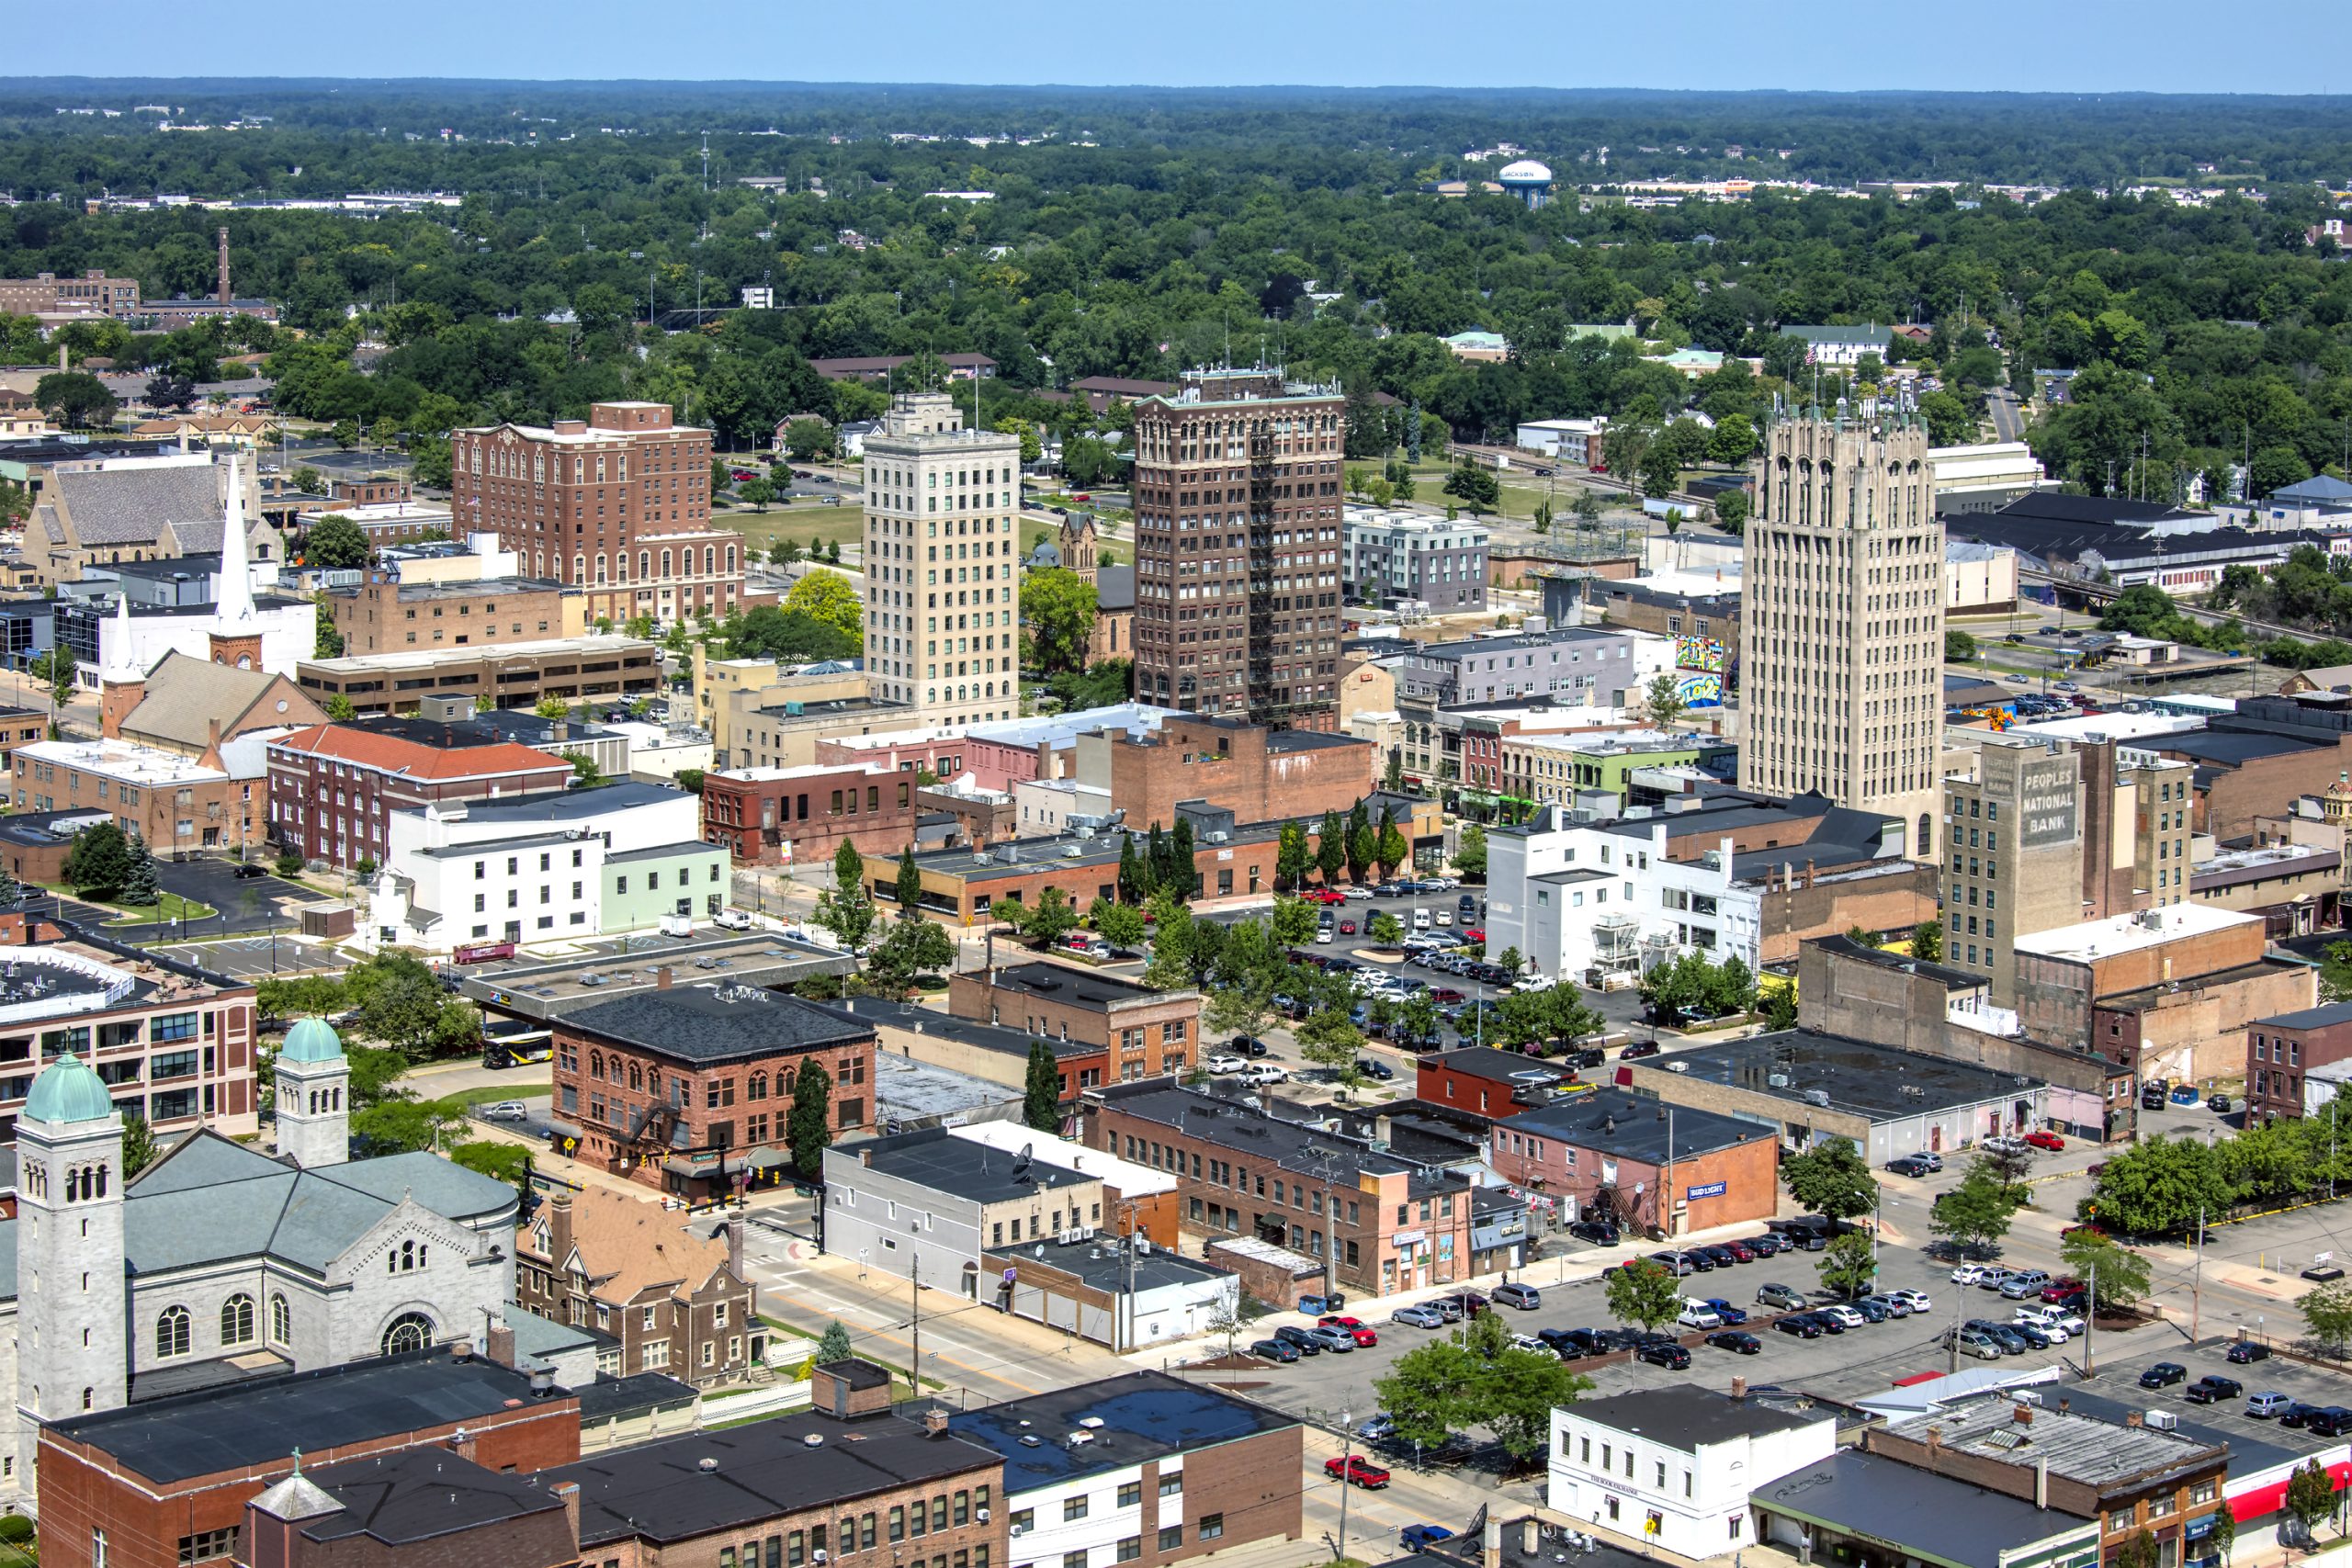 Helicopter Aerial photographs of Jackson taken 7-24-19